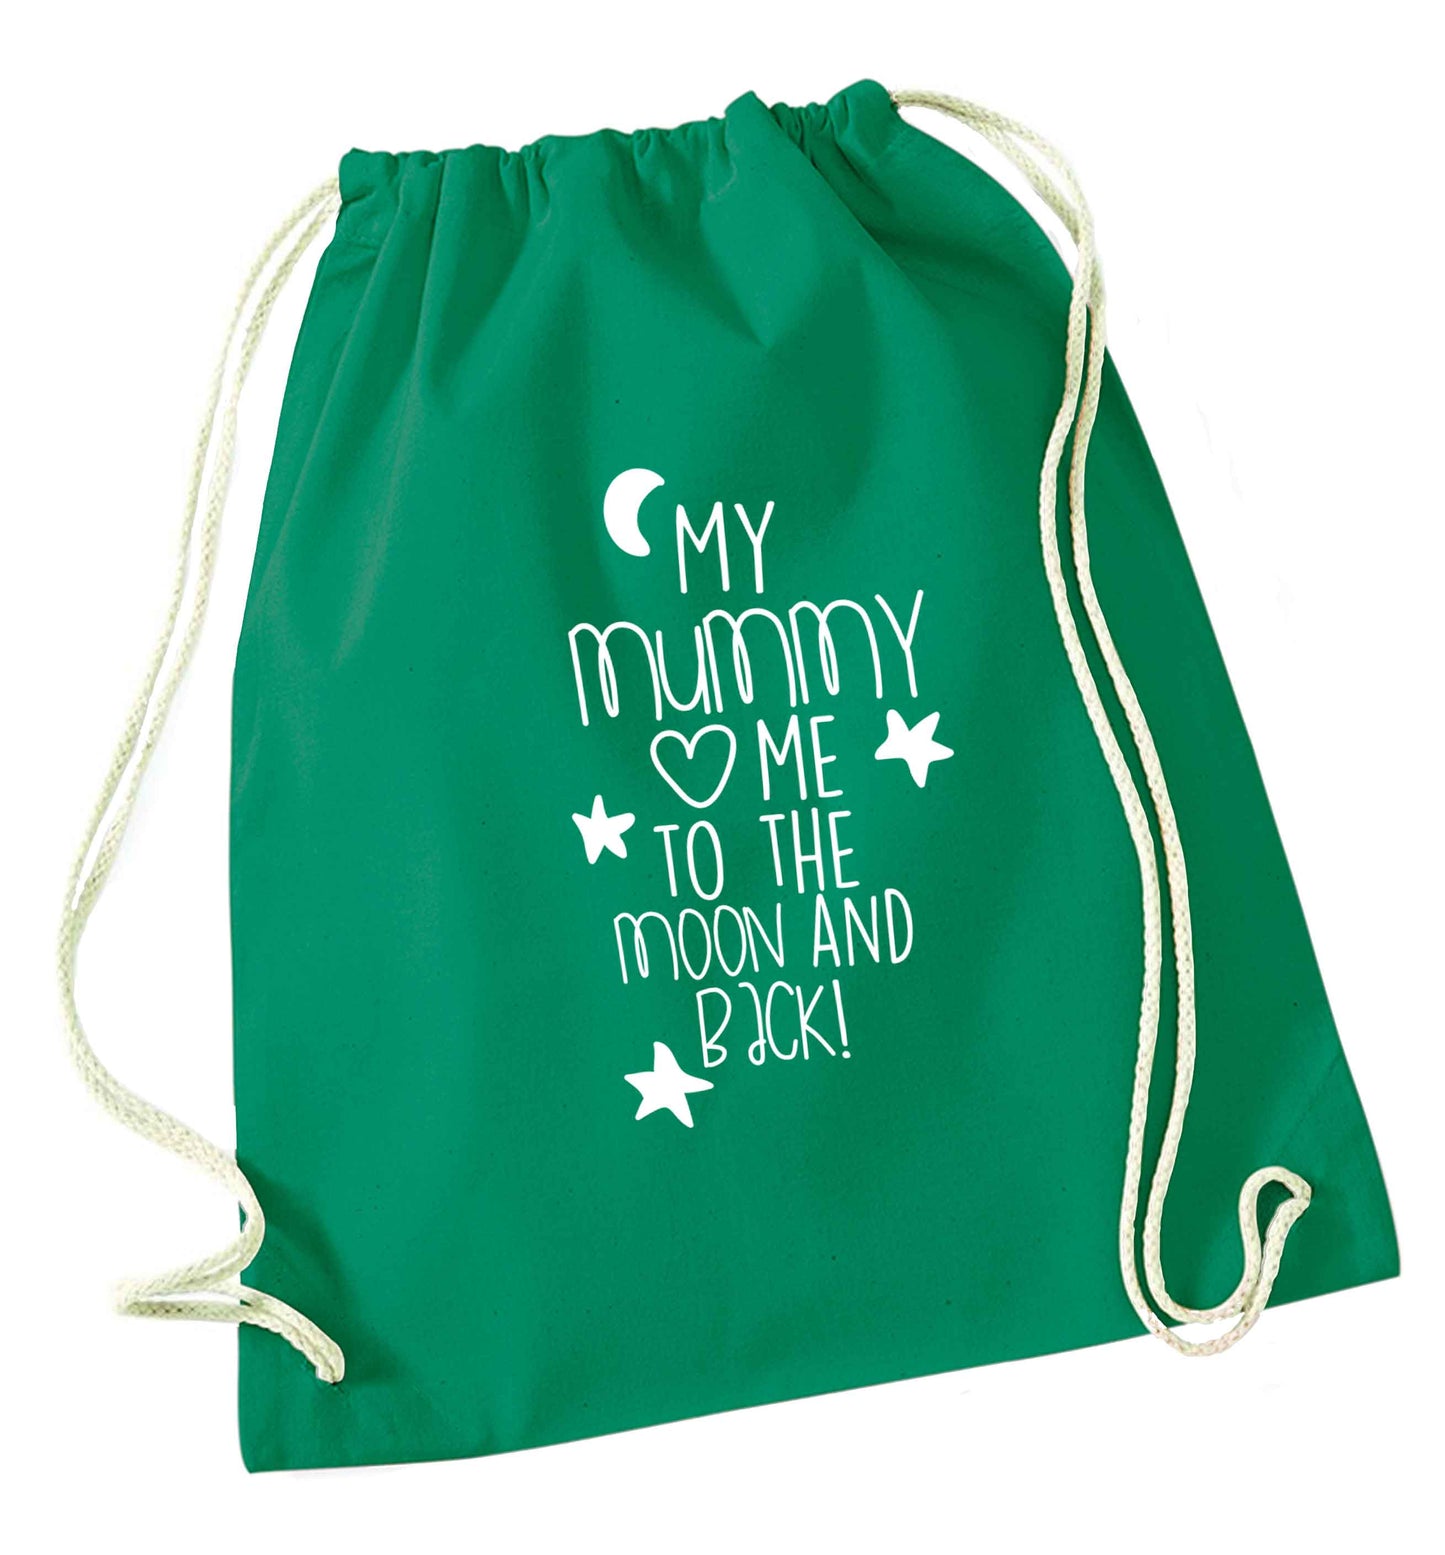 My mum loves me to the moon and back green drawstring bag